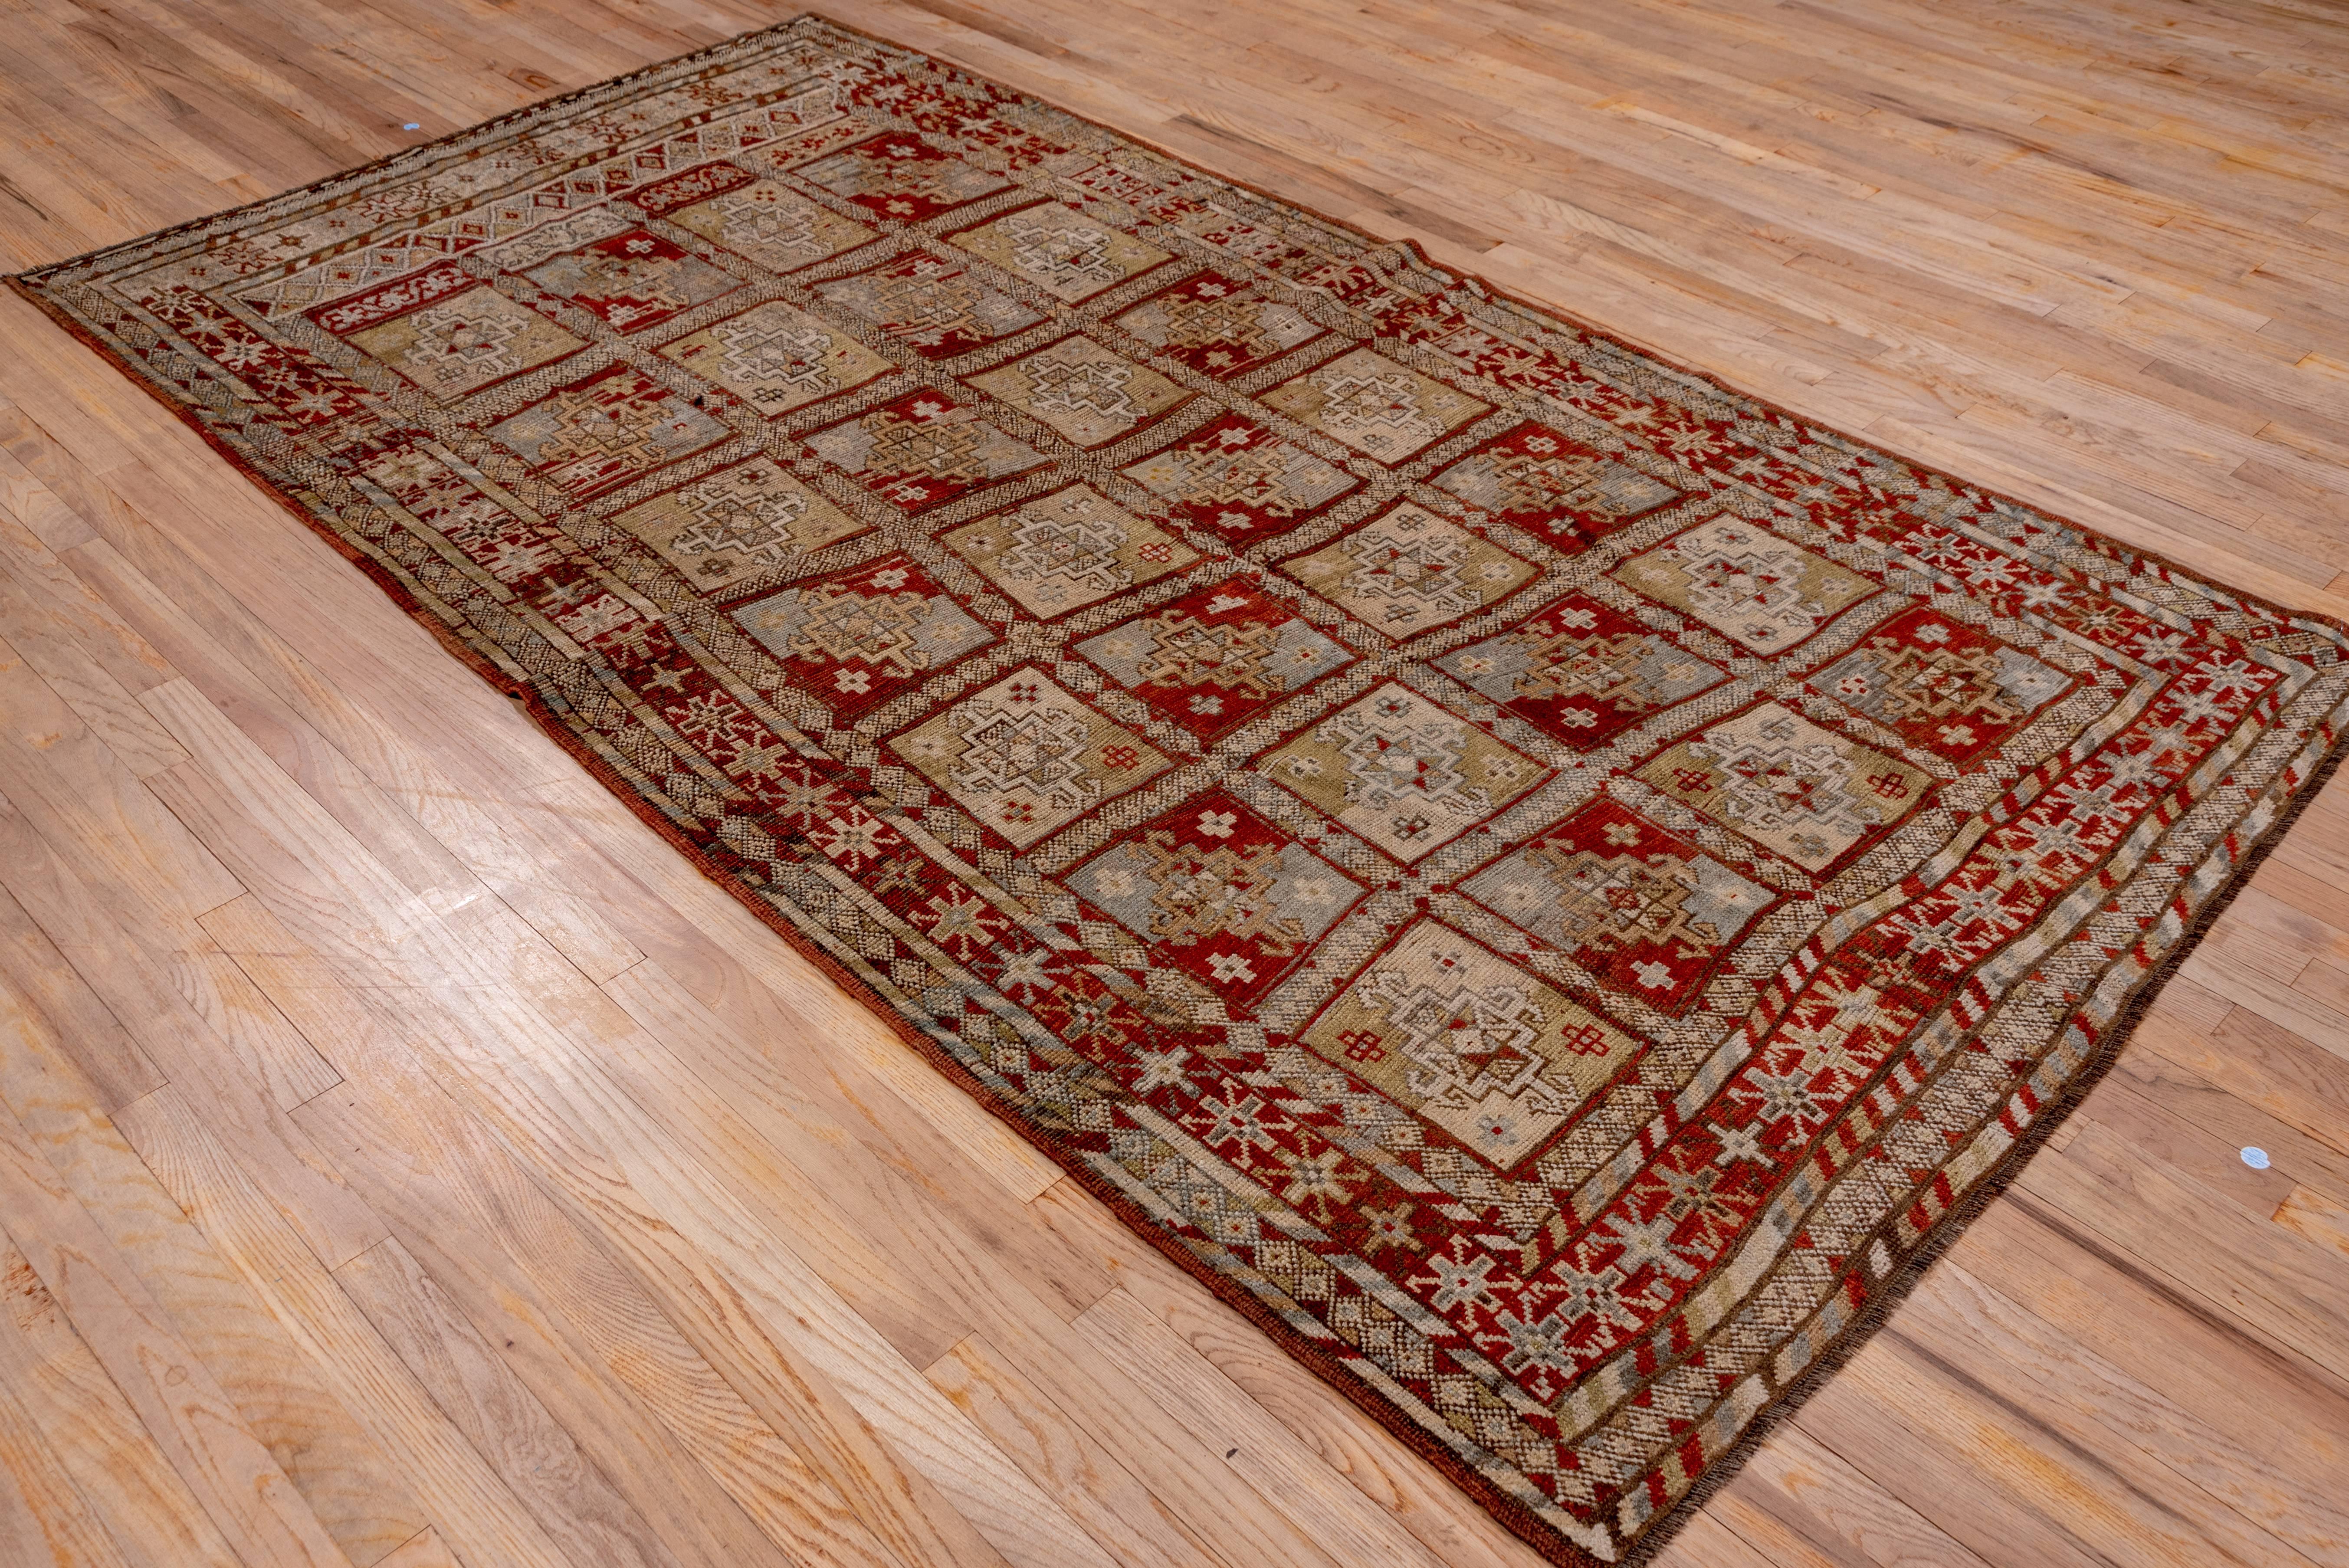 Tribal Northwest Persian Rug, Circa 1920s In Excellent Condition For Sale In New York, NY